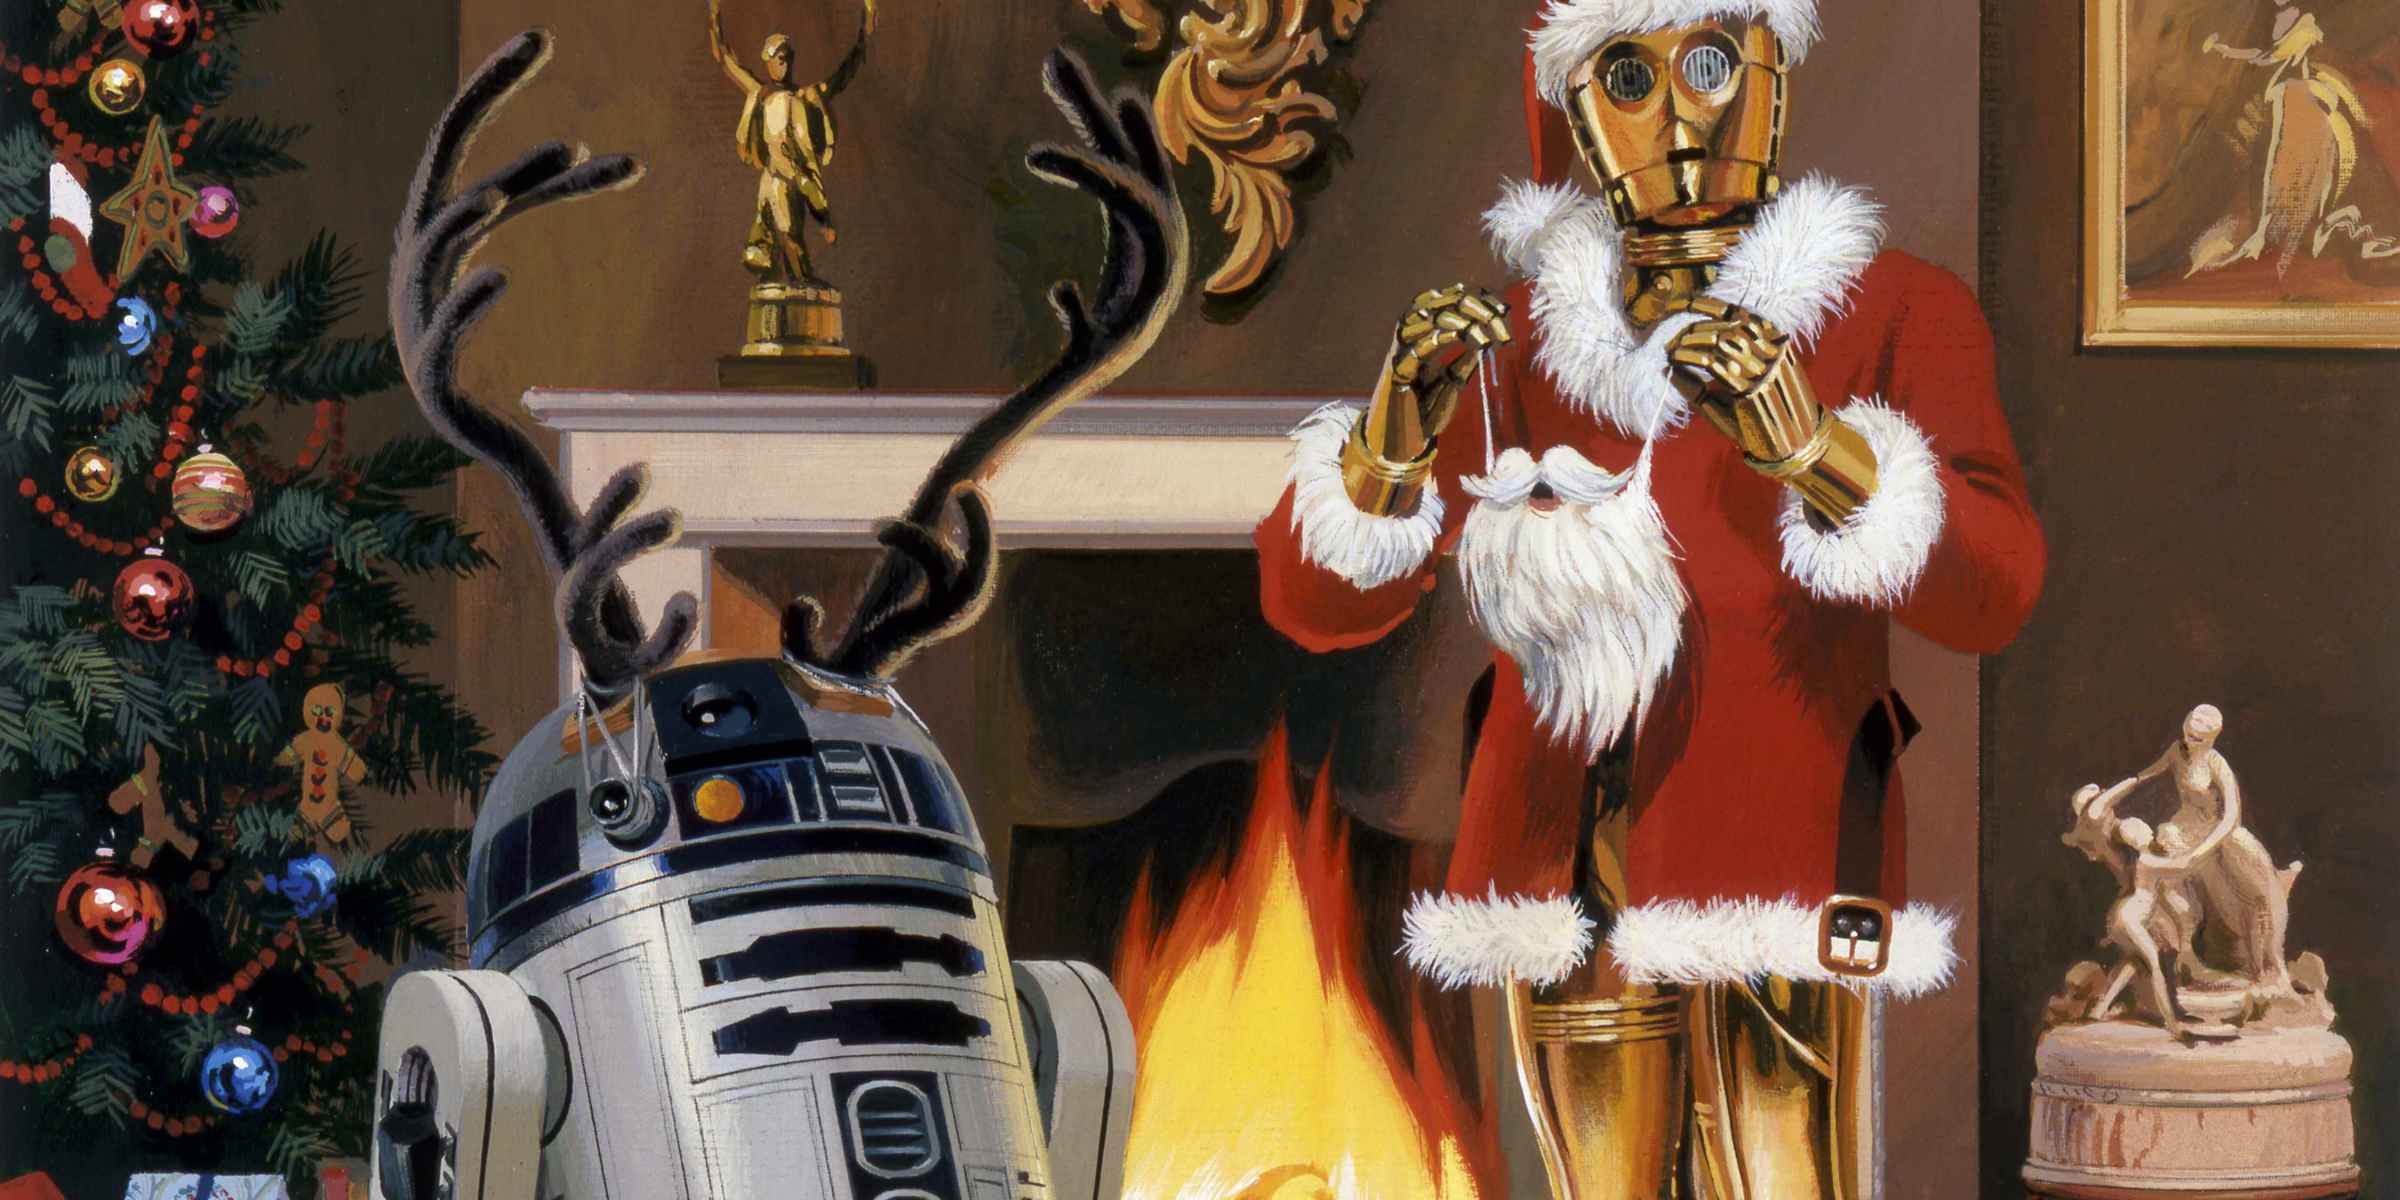 Merry Christmas Star Wars Wallpapers - Wallpaper Cave